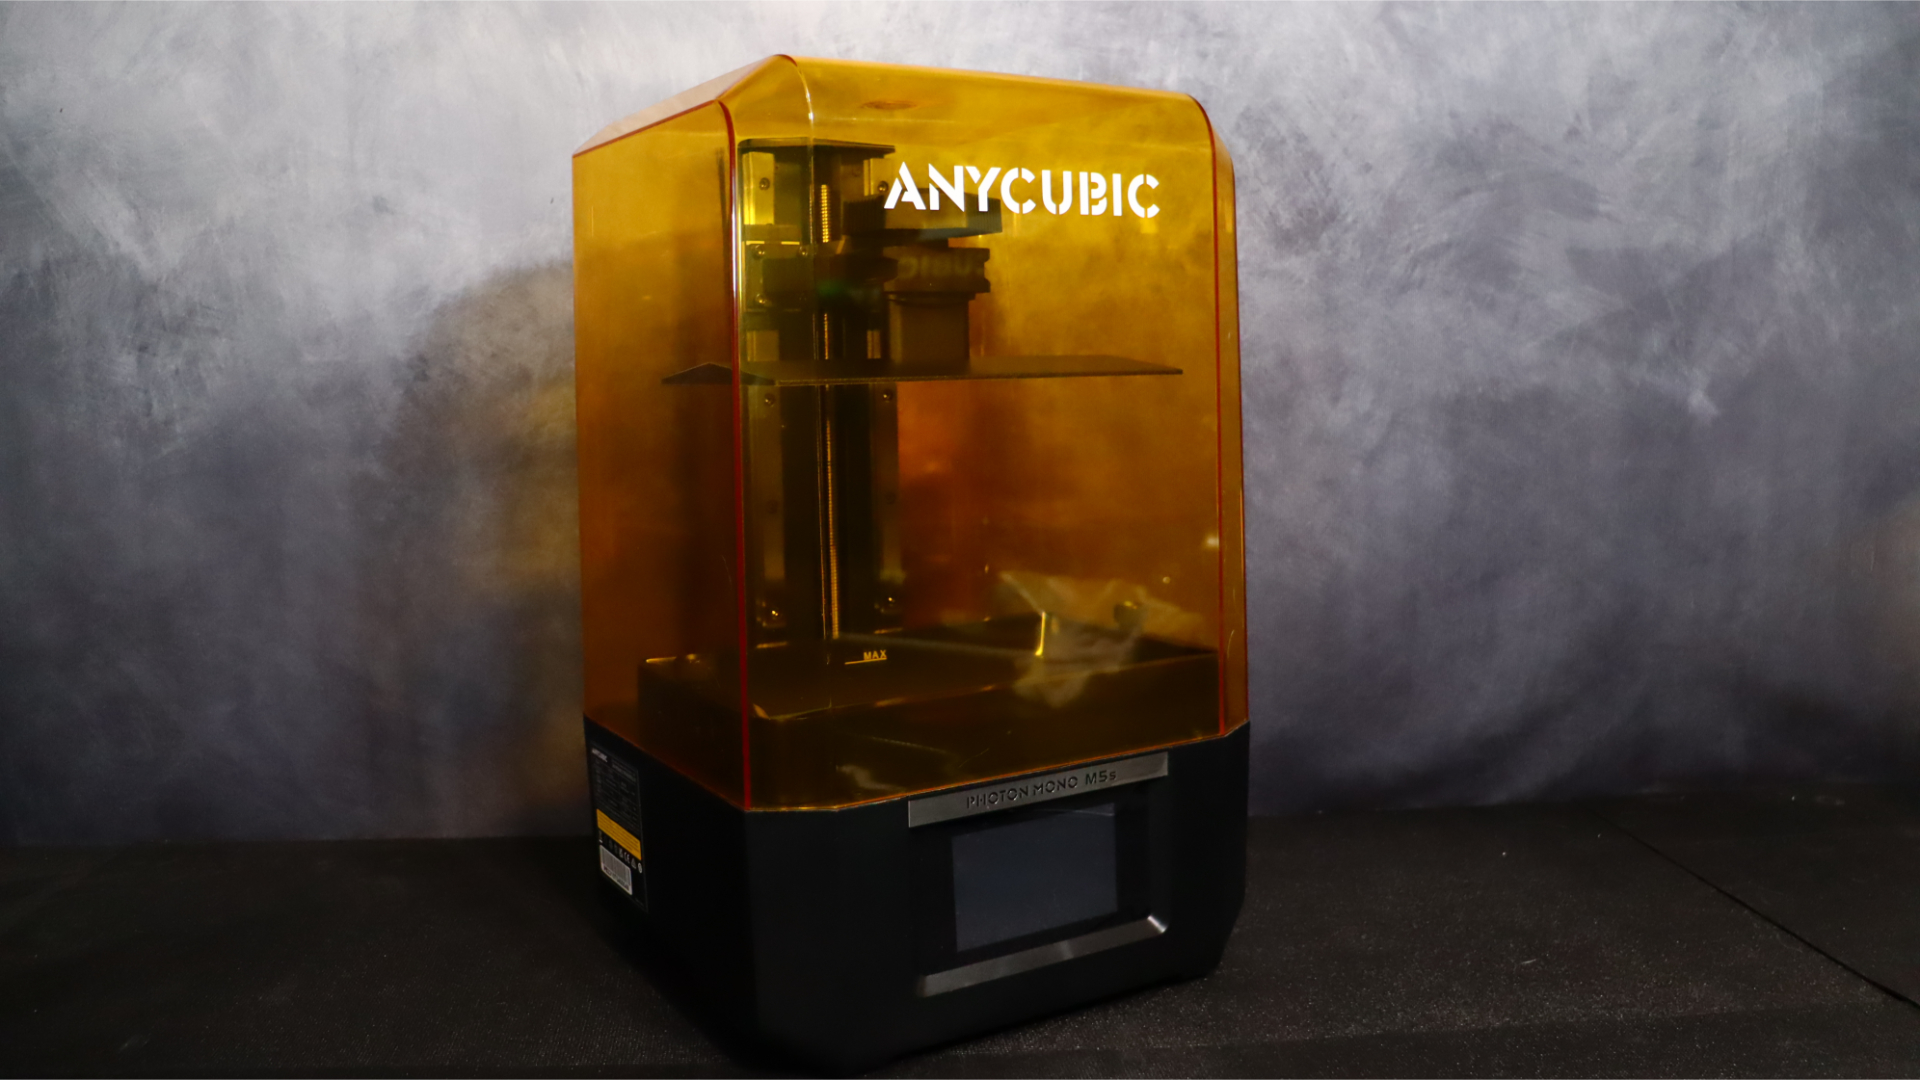 Anycubic Photon Mono M5s Review: More Pixels, More Level